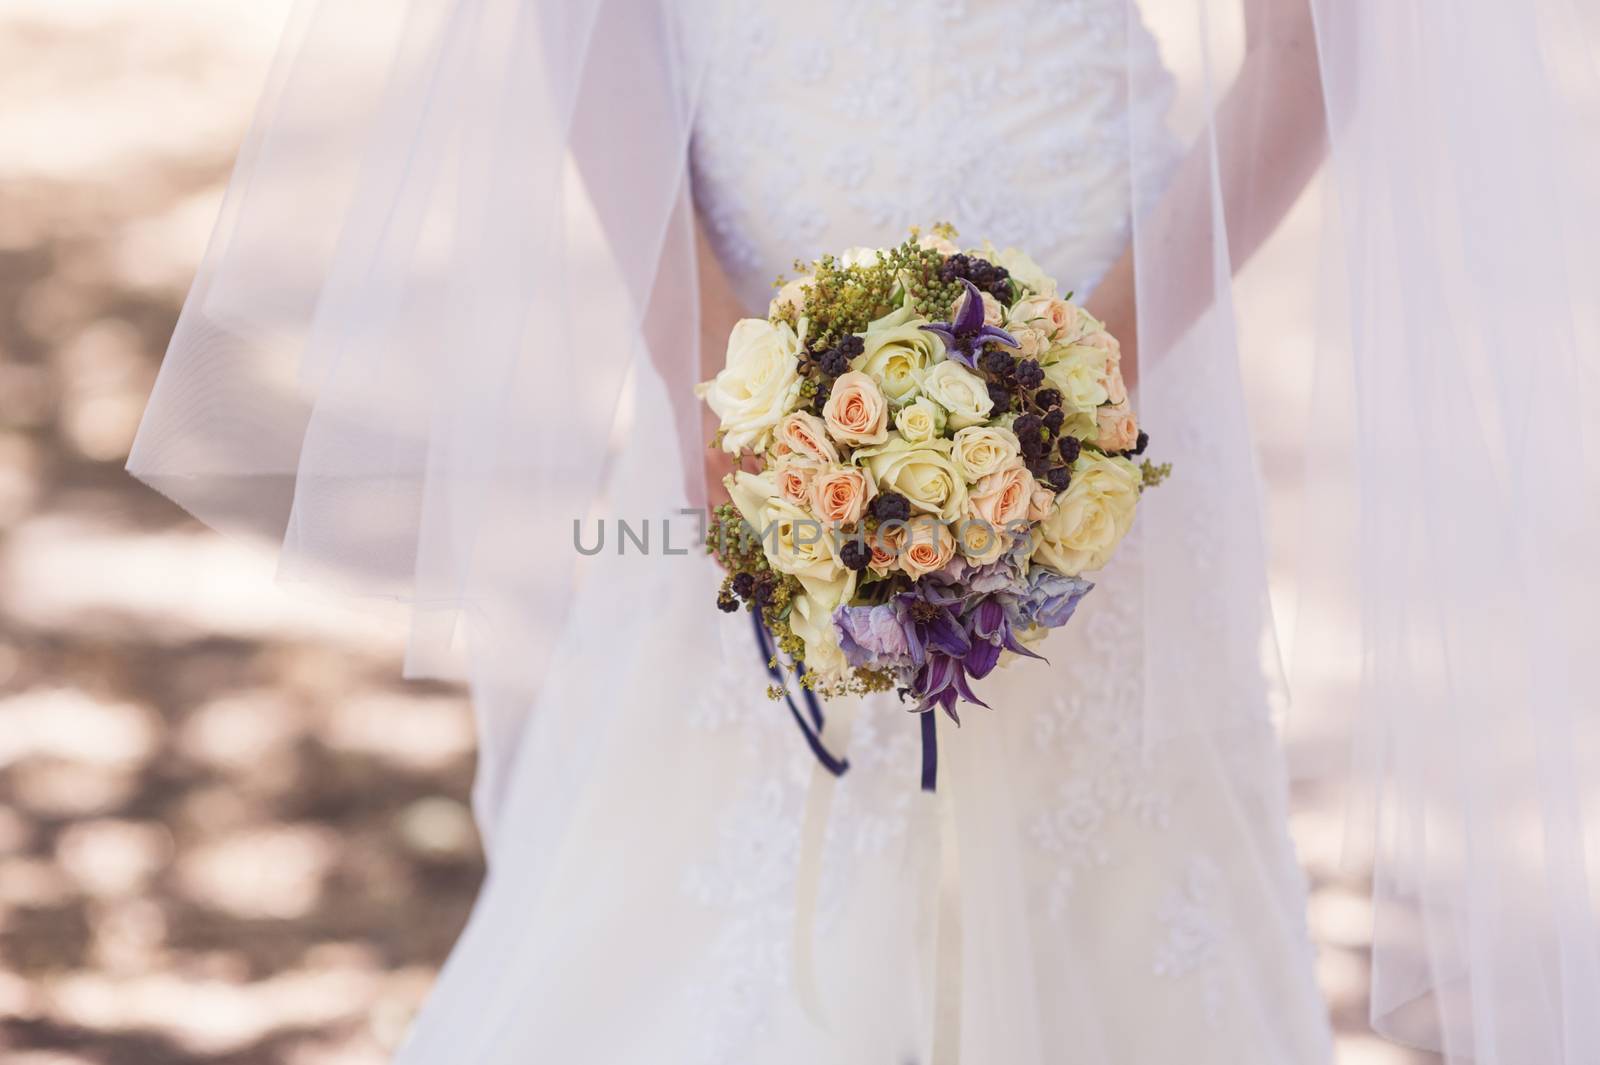 bride holding a beautiful bridal bouquet on the walk.